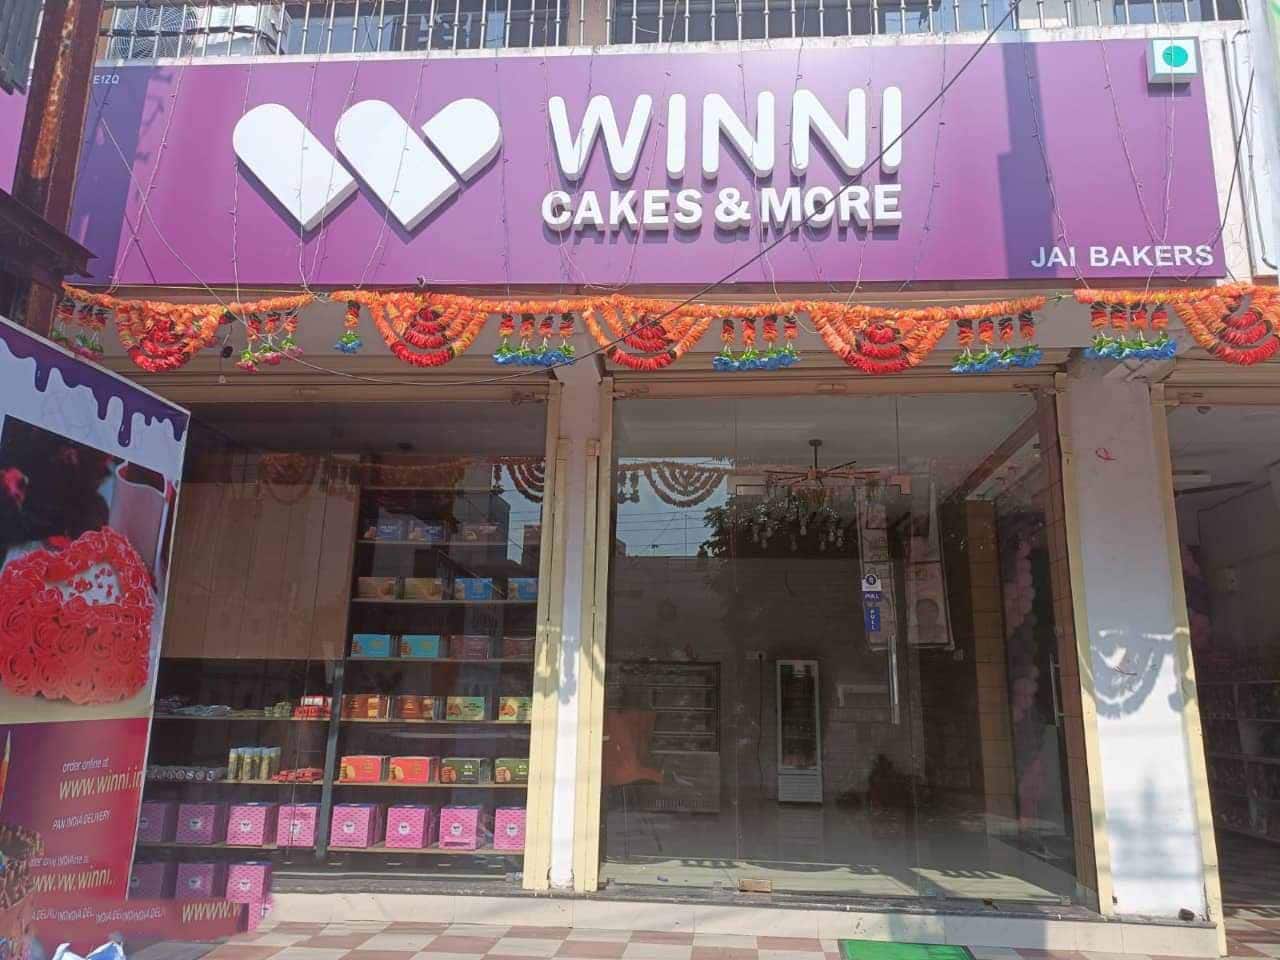 Winni Cakes & More Records 74% YoY Growth, Opened 125 More Retail Stores in  FY 2022-23 - Hospitality Biz India : India hospitality news, hospitality  business analysis